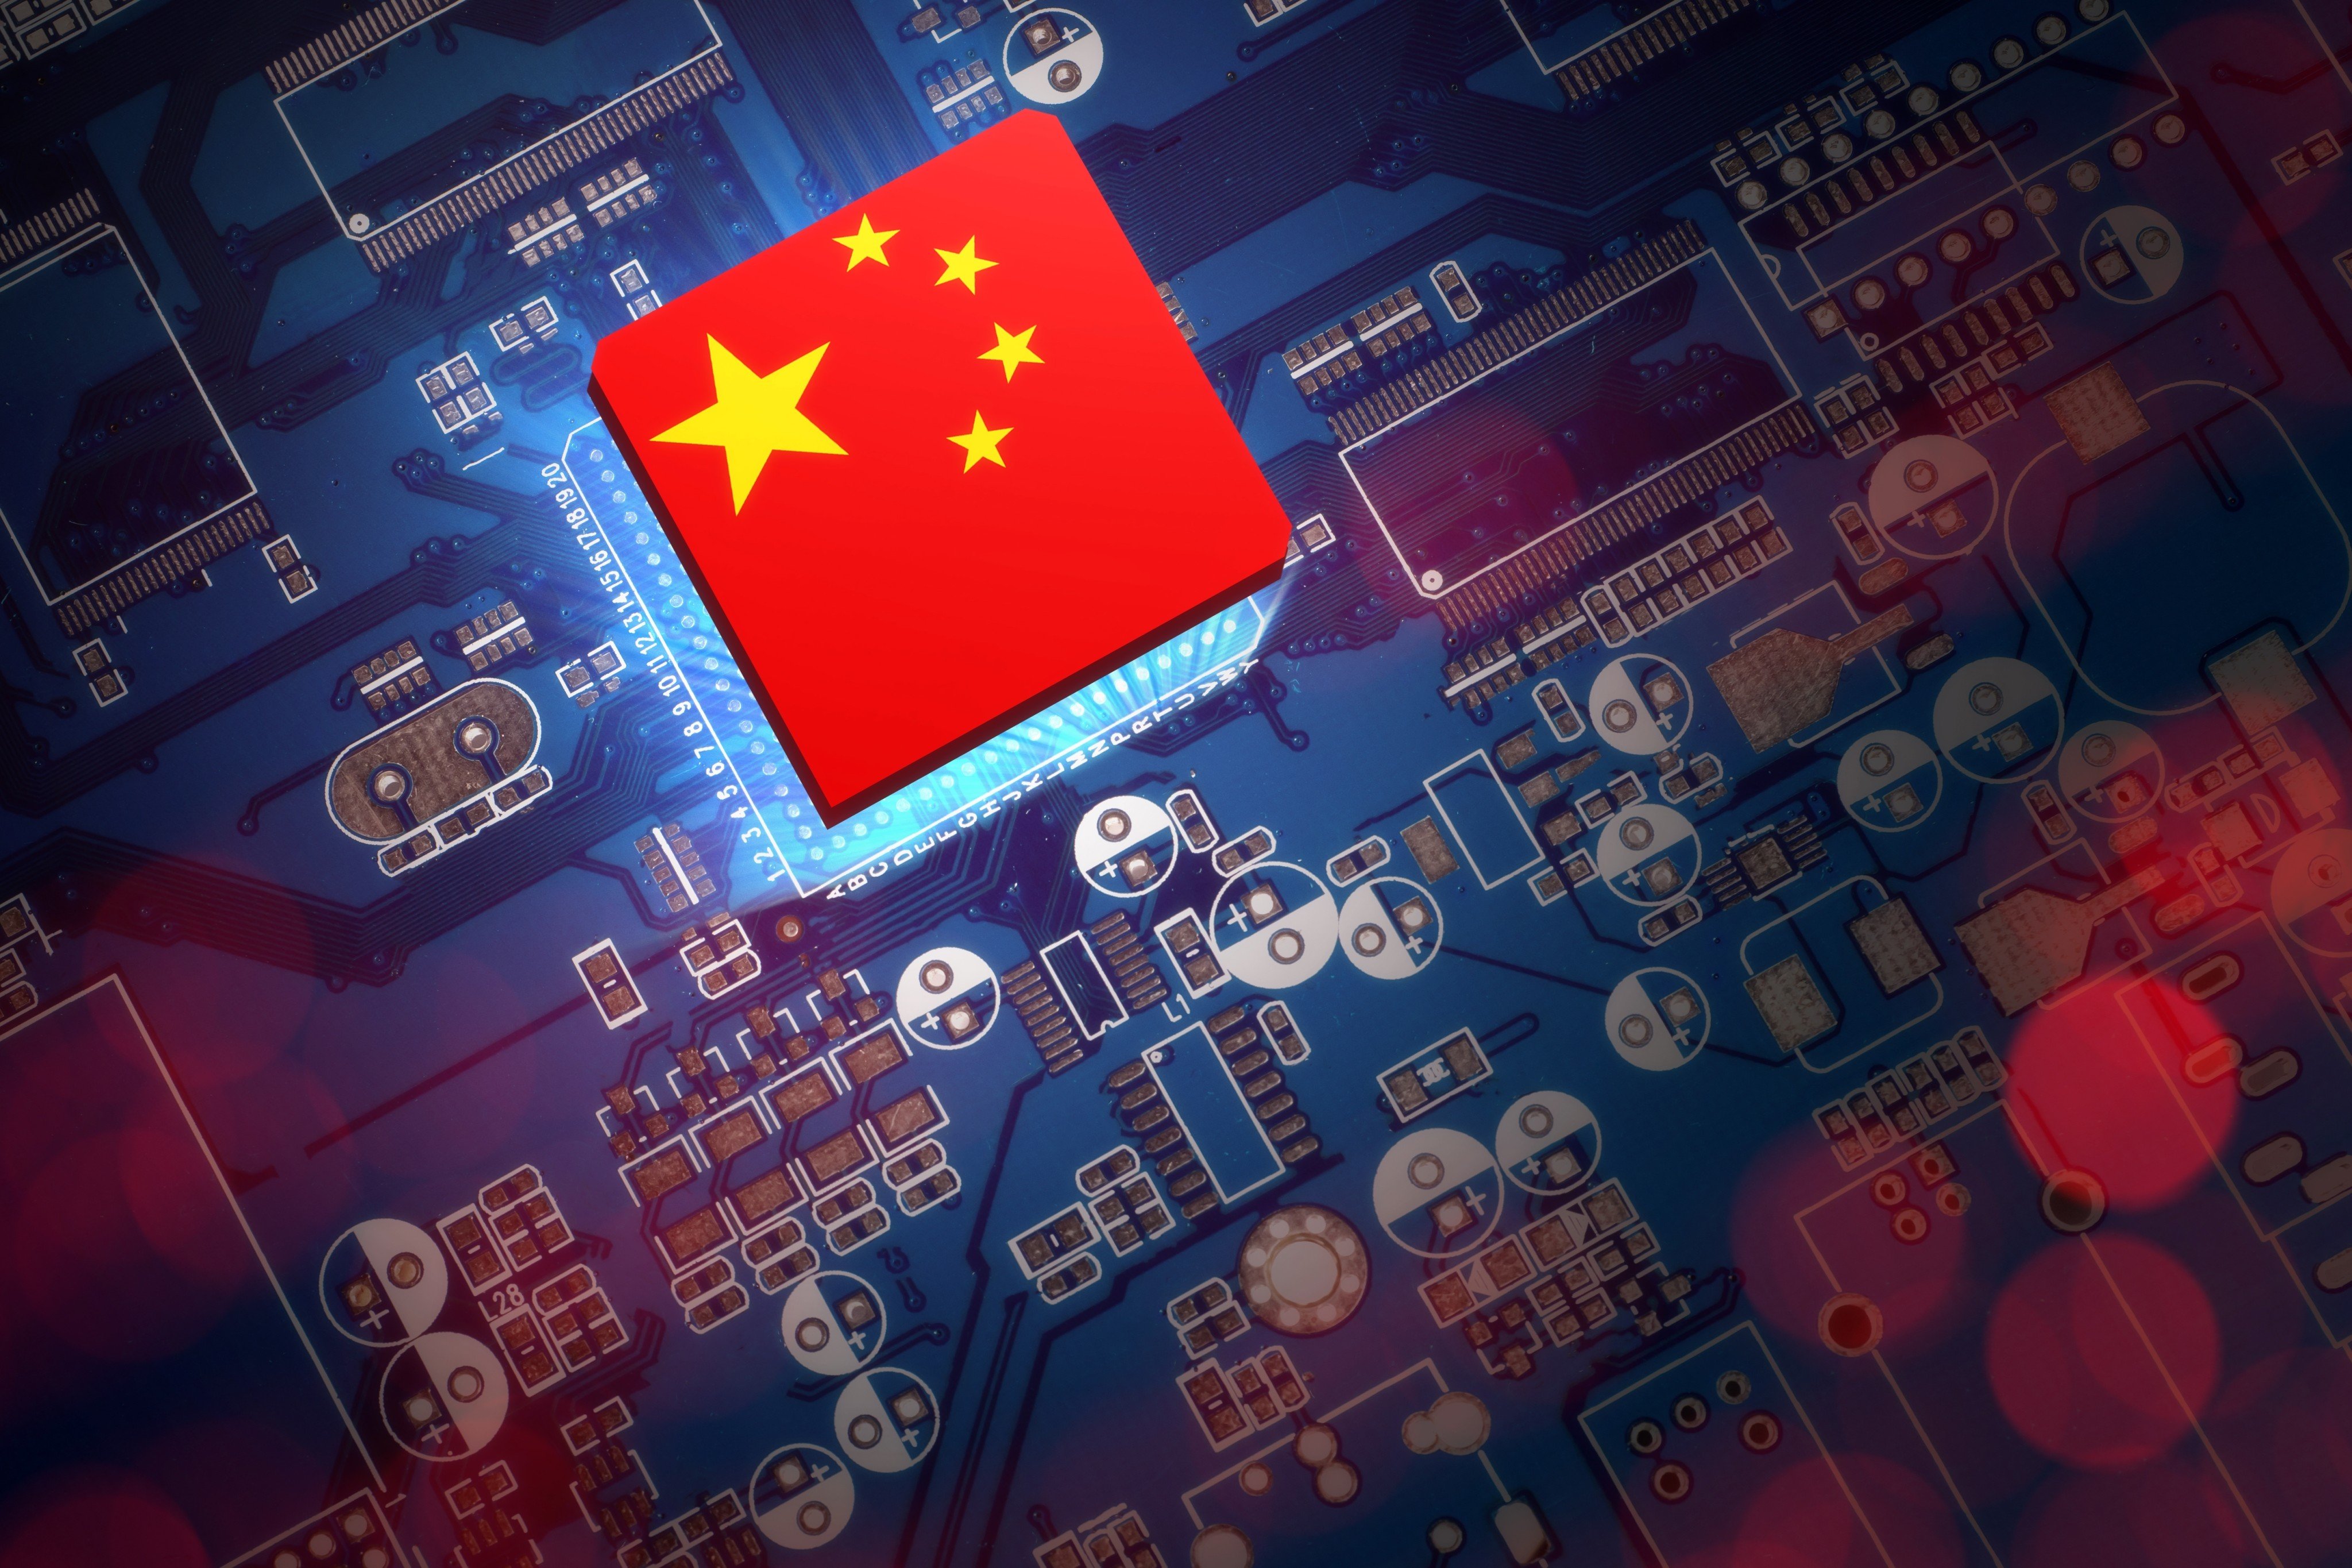 Japan’s chip export controls are a major concern for China. Photo: Shutterstock 